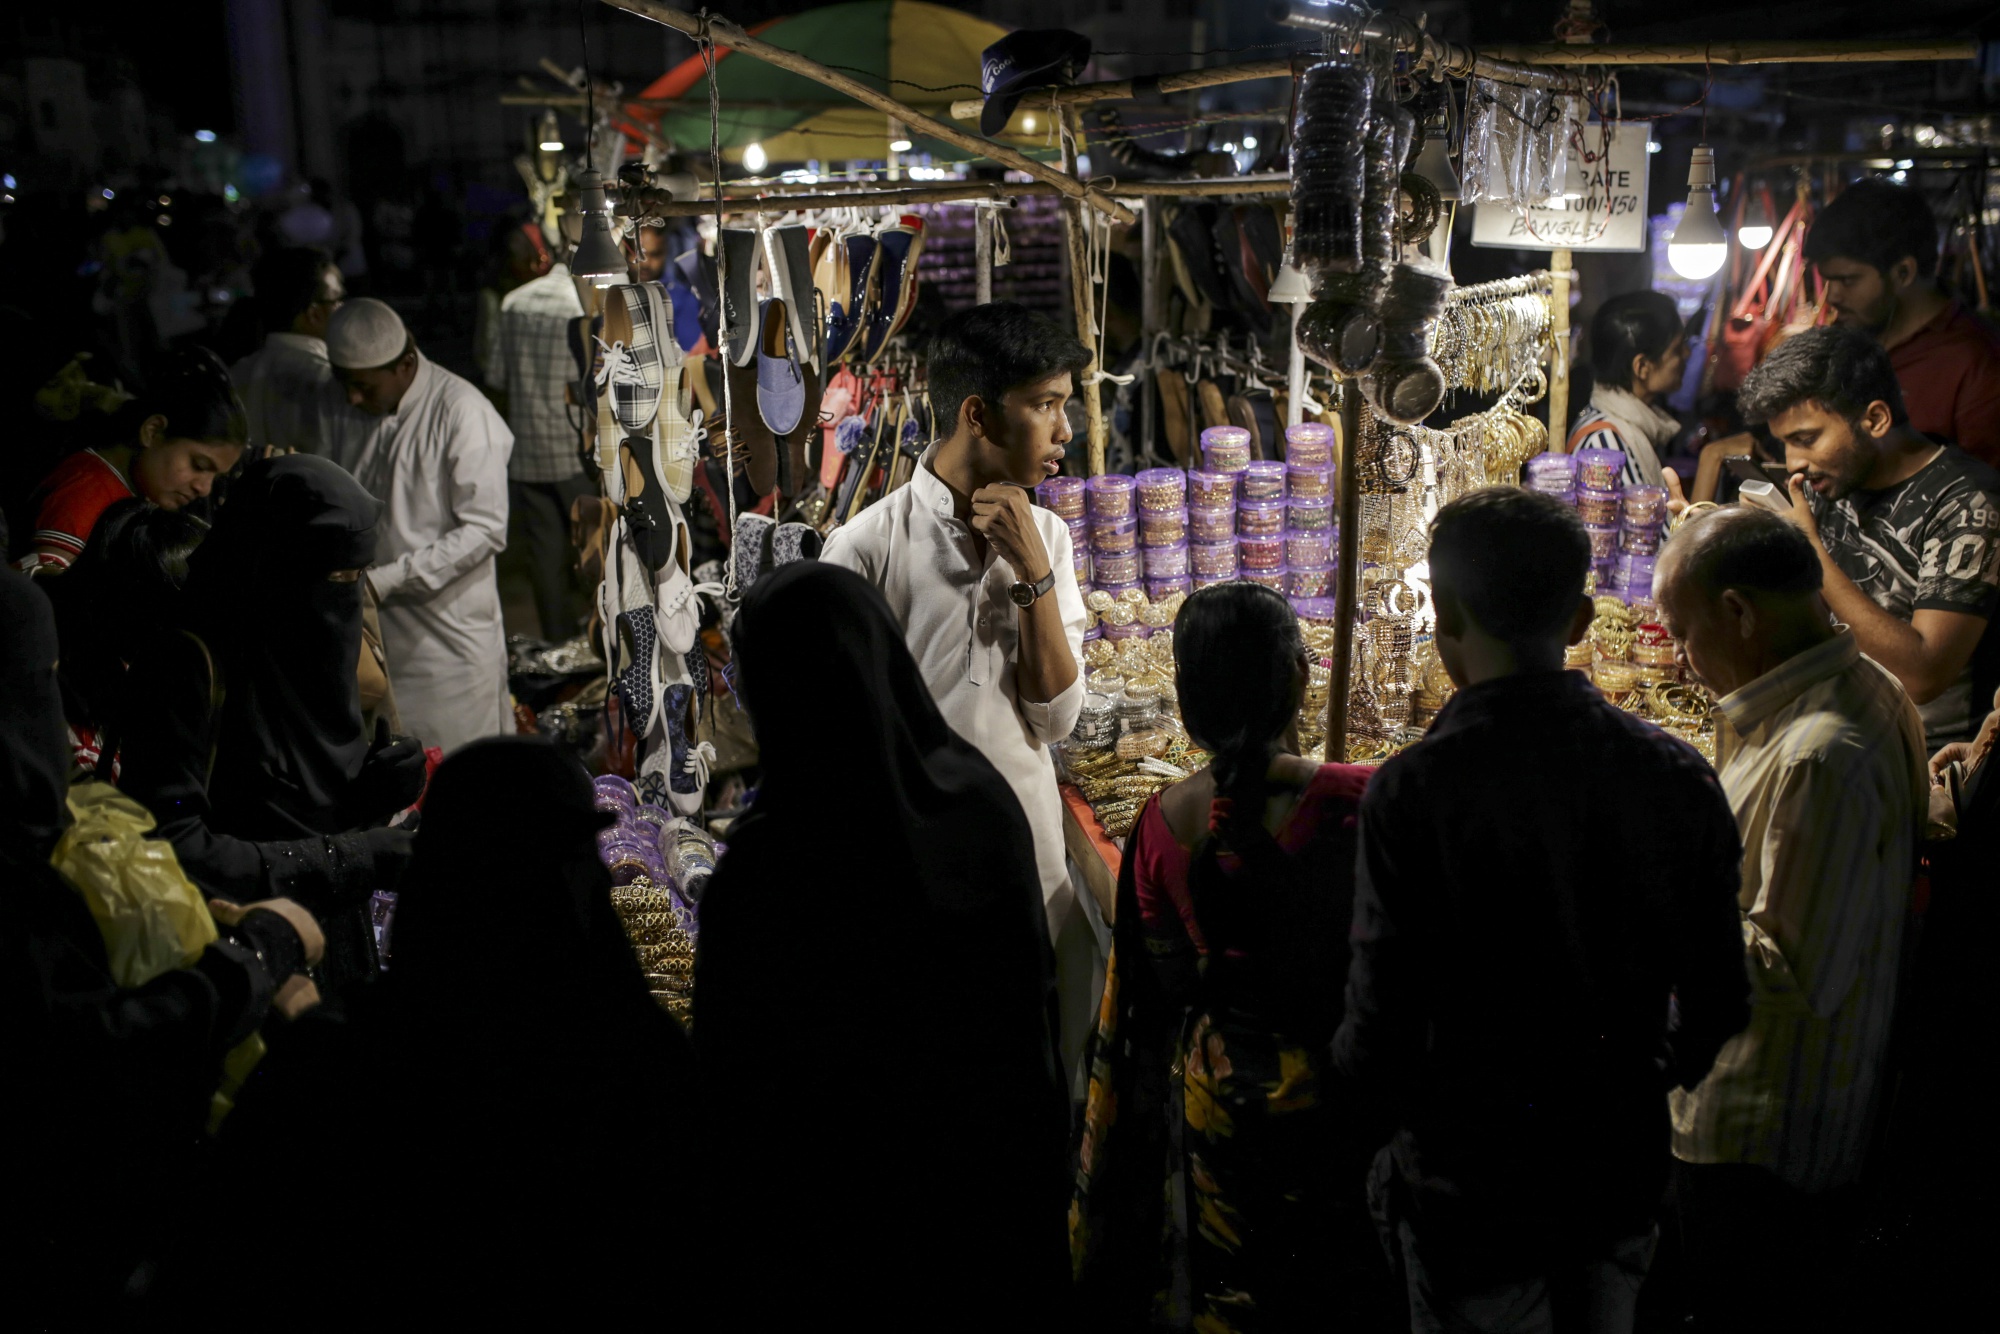 A roadside jewelry vendor attends to customers at a stall in Hyderabad, India.